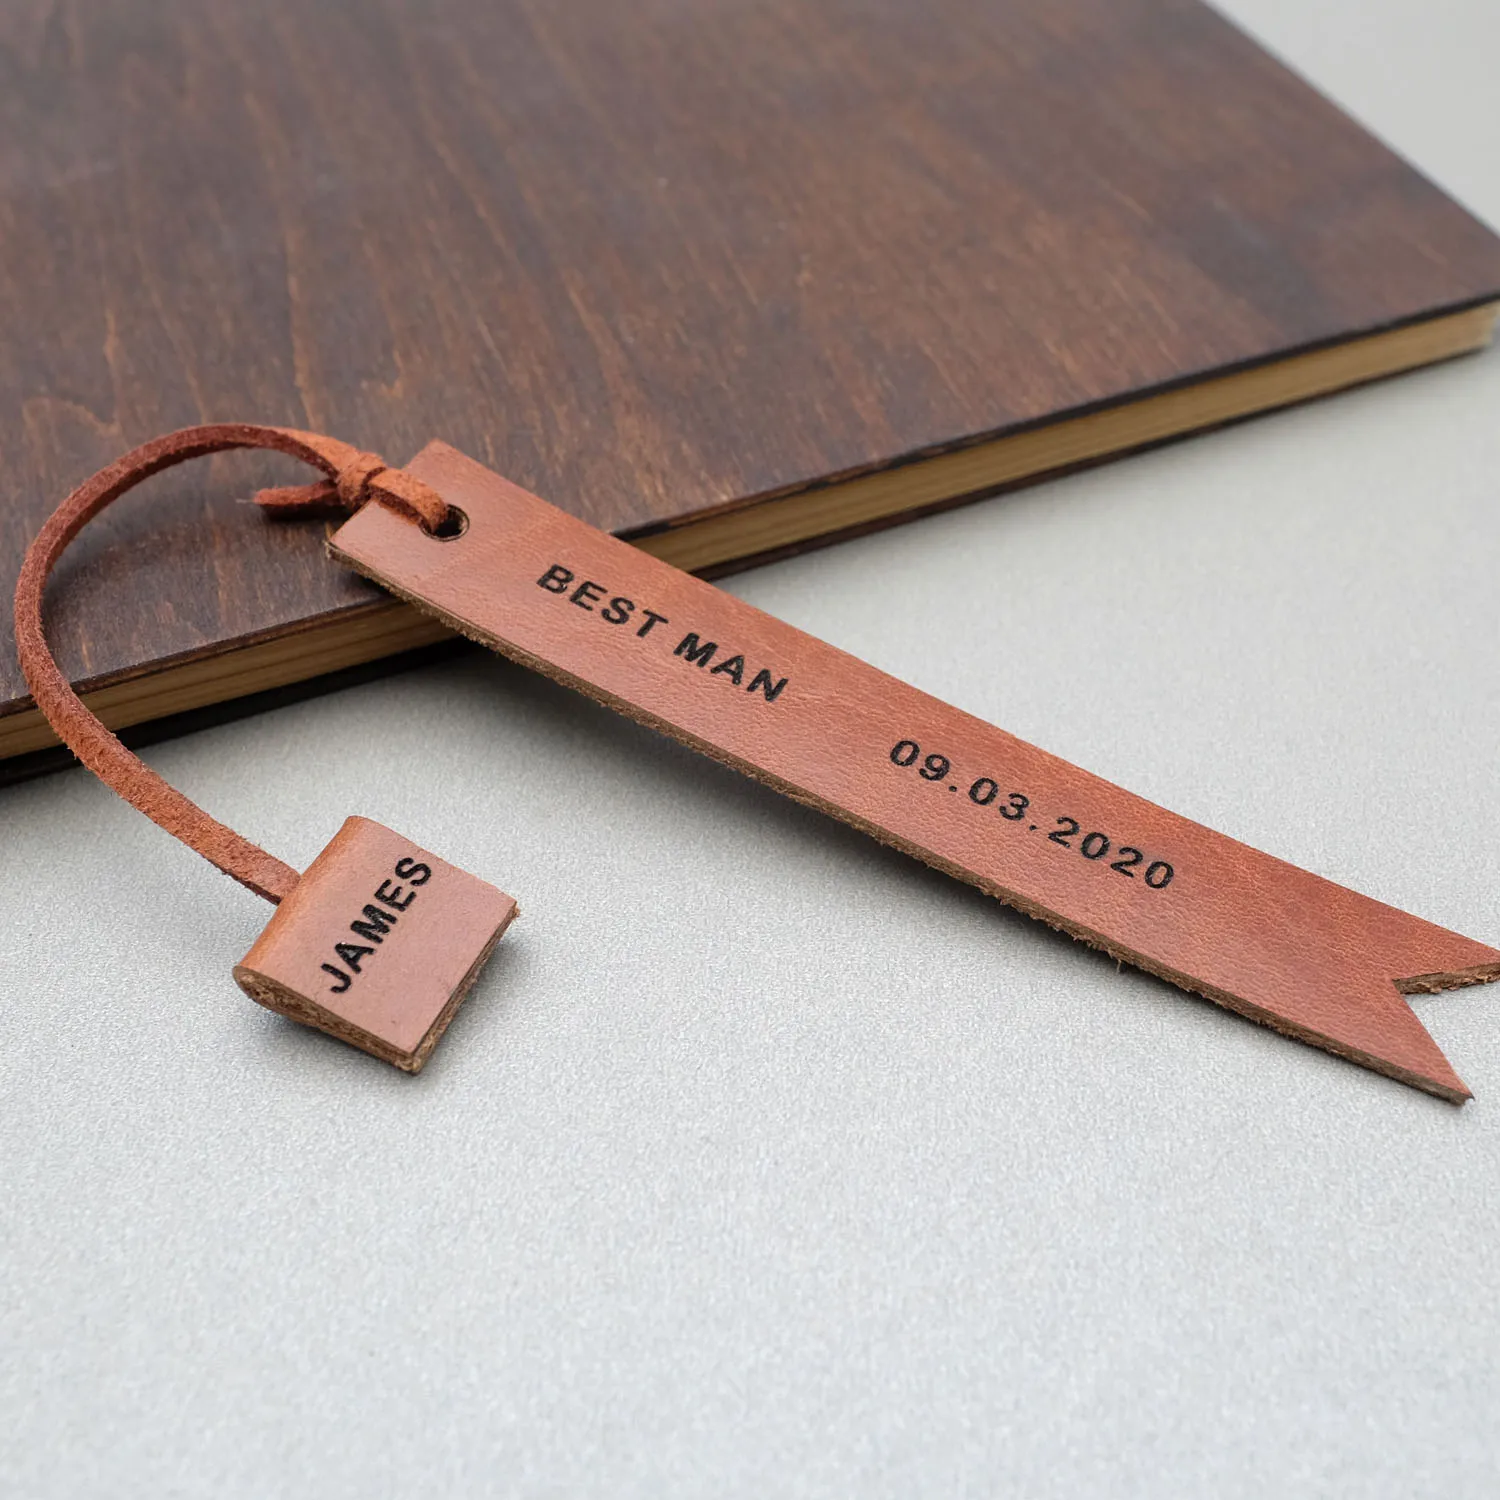 Personalised Leather Bookmark Wedding Gift for Groomsmen Best Man Books Clips Stationery Book Marker Page Holder Christmas Gifts